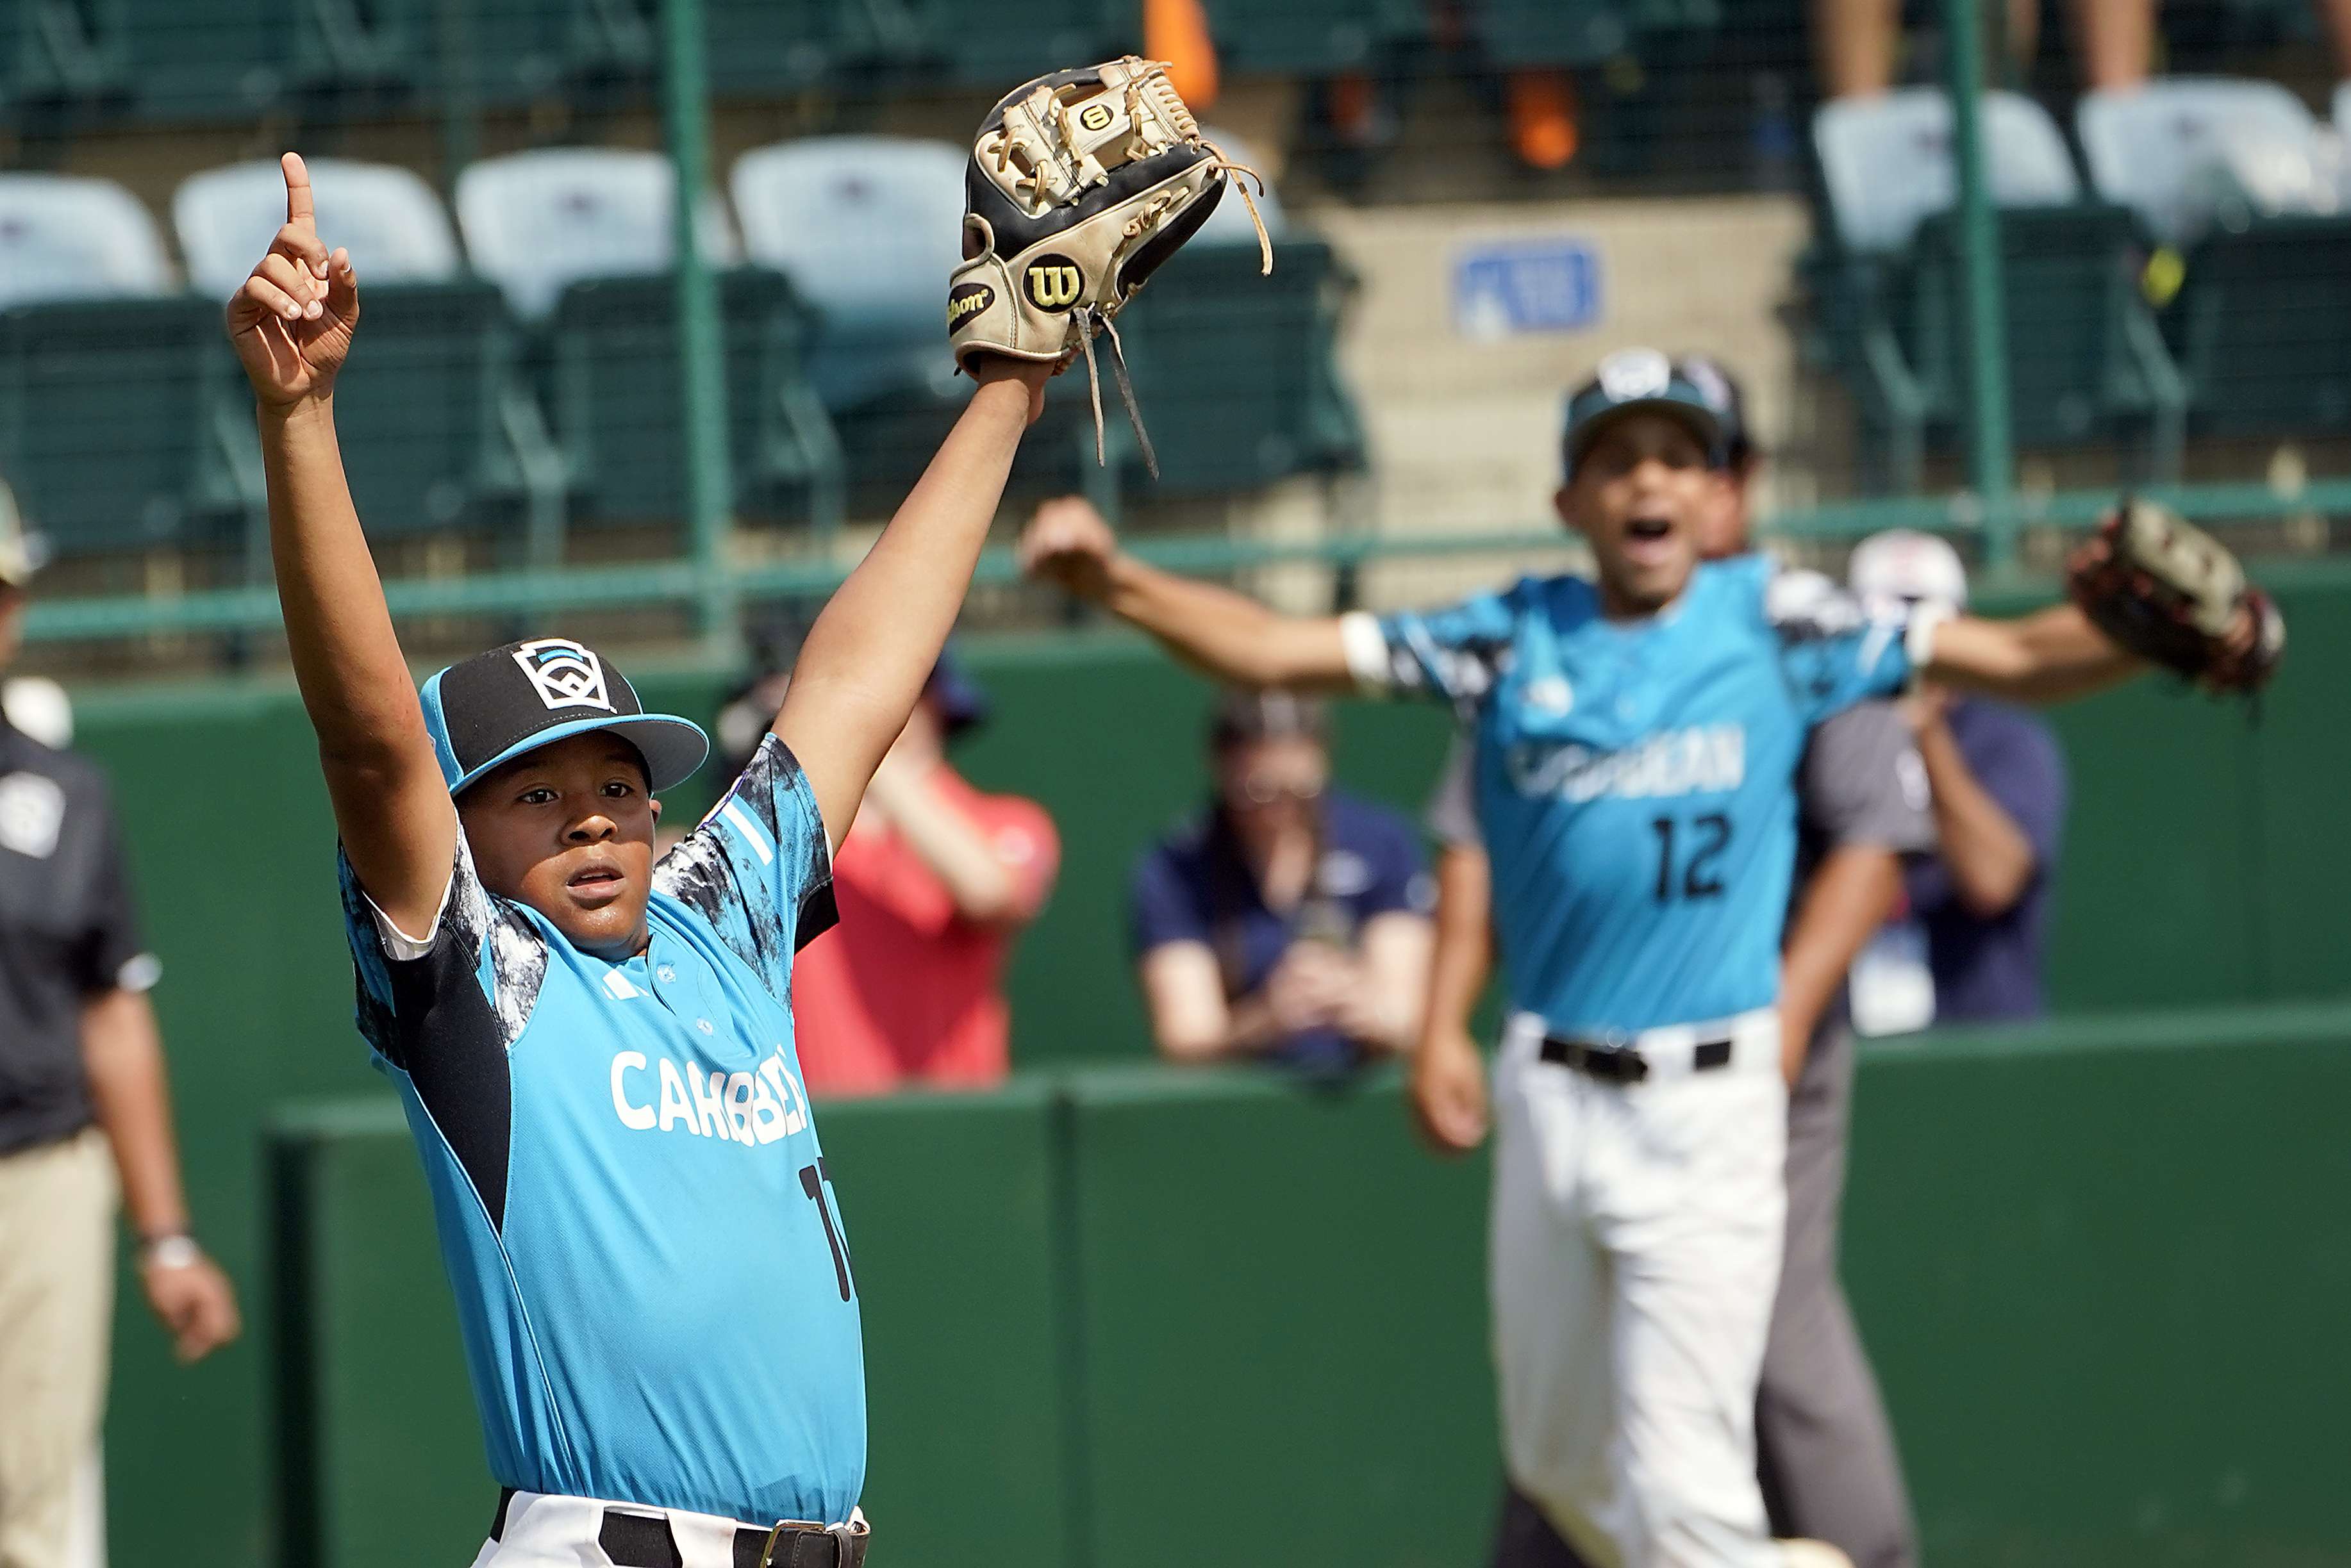 Needville among 4 teams remaining in Little League World Series: Looking  ahead to the finals